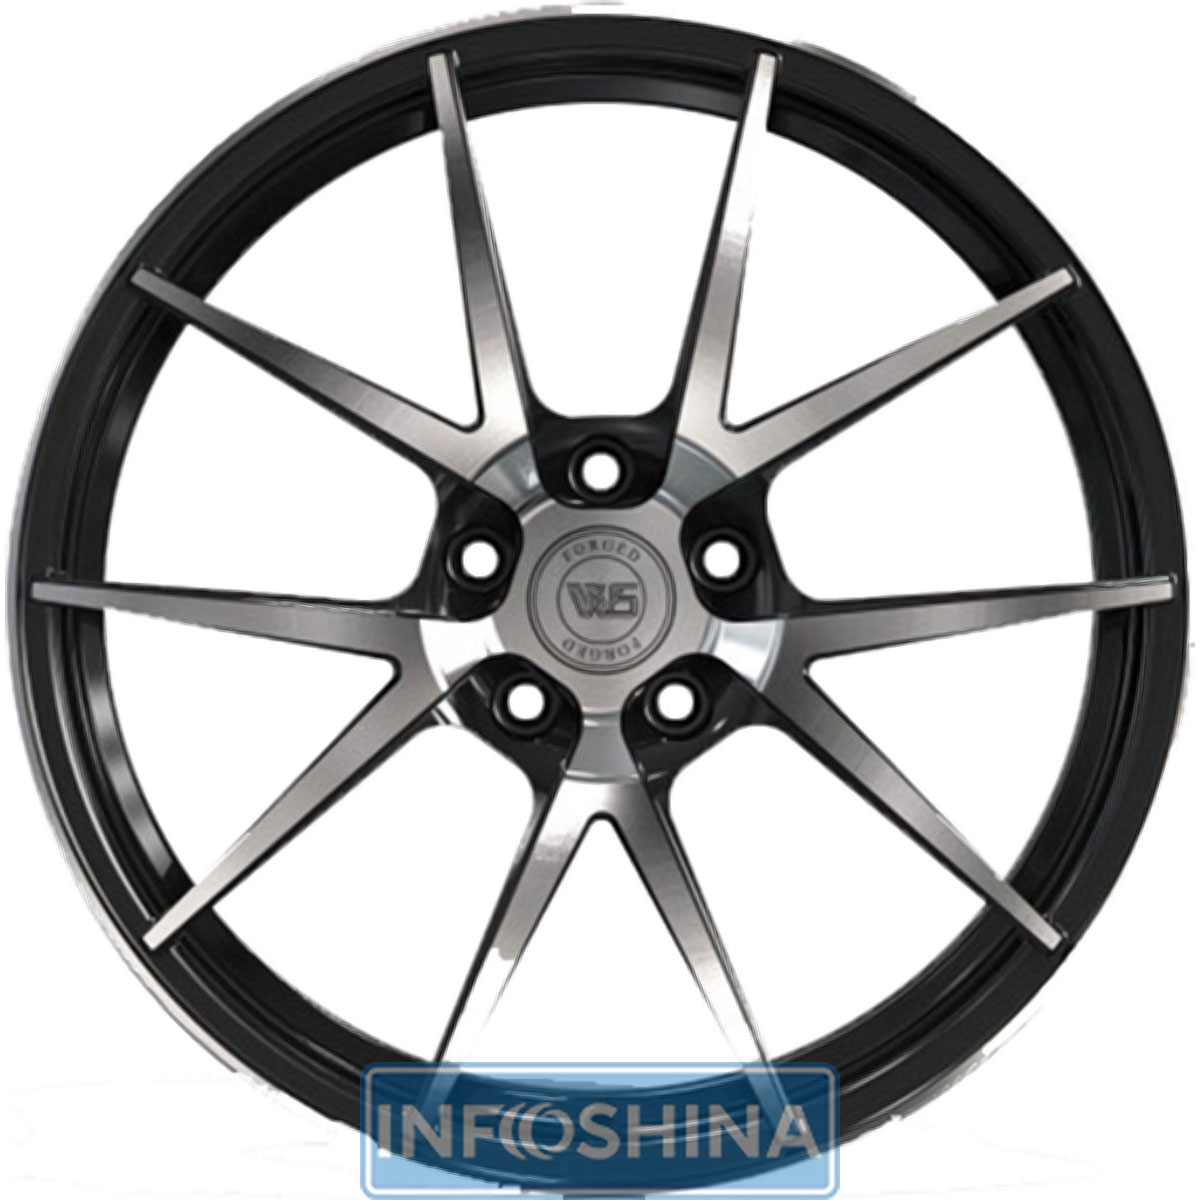 Купить диски WS Forged WS2259 Gloss Black With Machined Face R19 W8 PCD5x114.3 ET45 DIA67.1